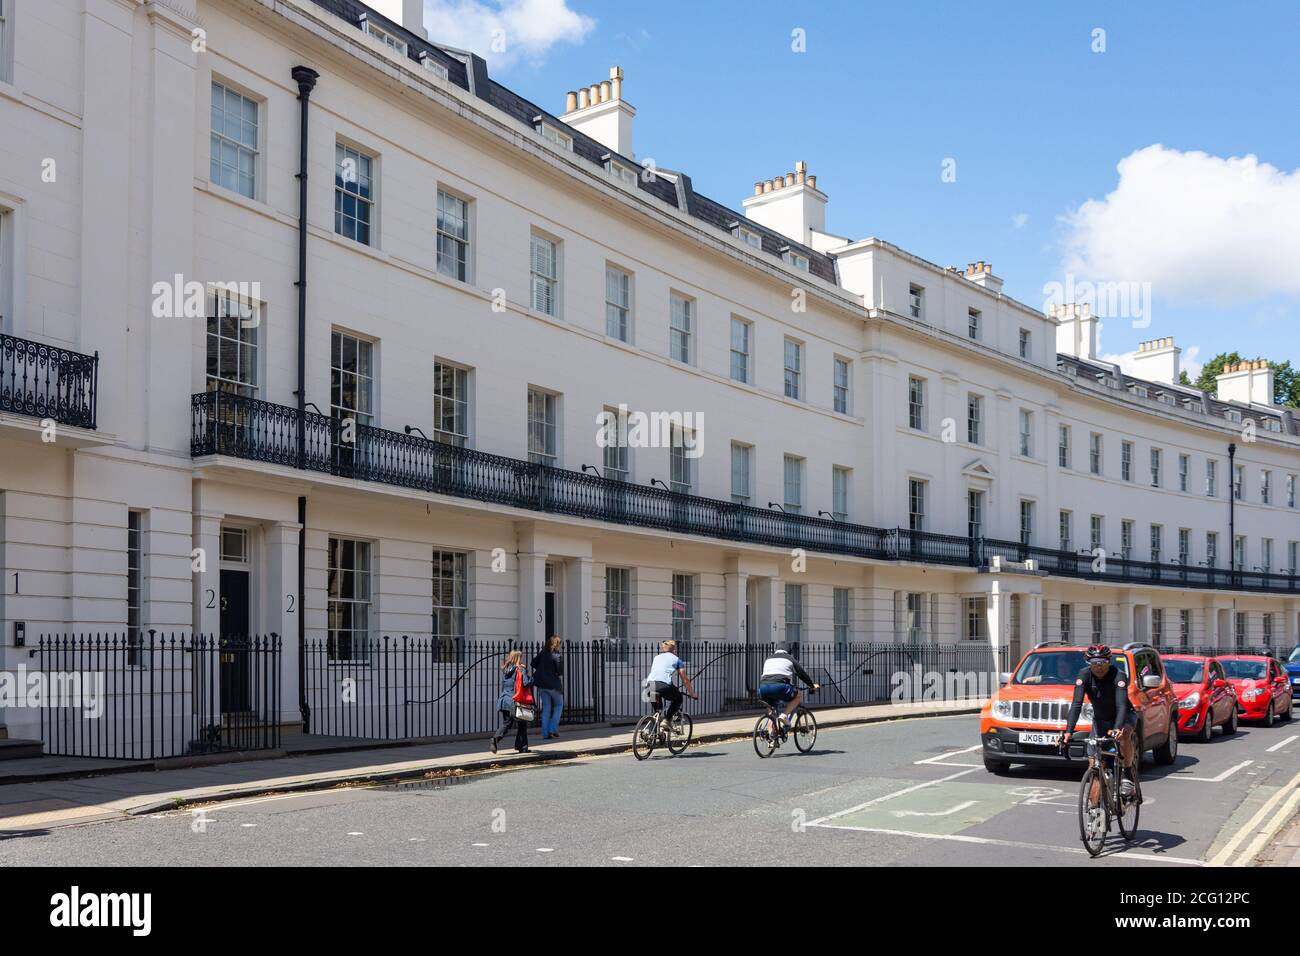 Neo-classical terraced houses, St Leonard's Place, York, North Yorkshire, England, United Kingdom Stock Photo